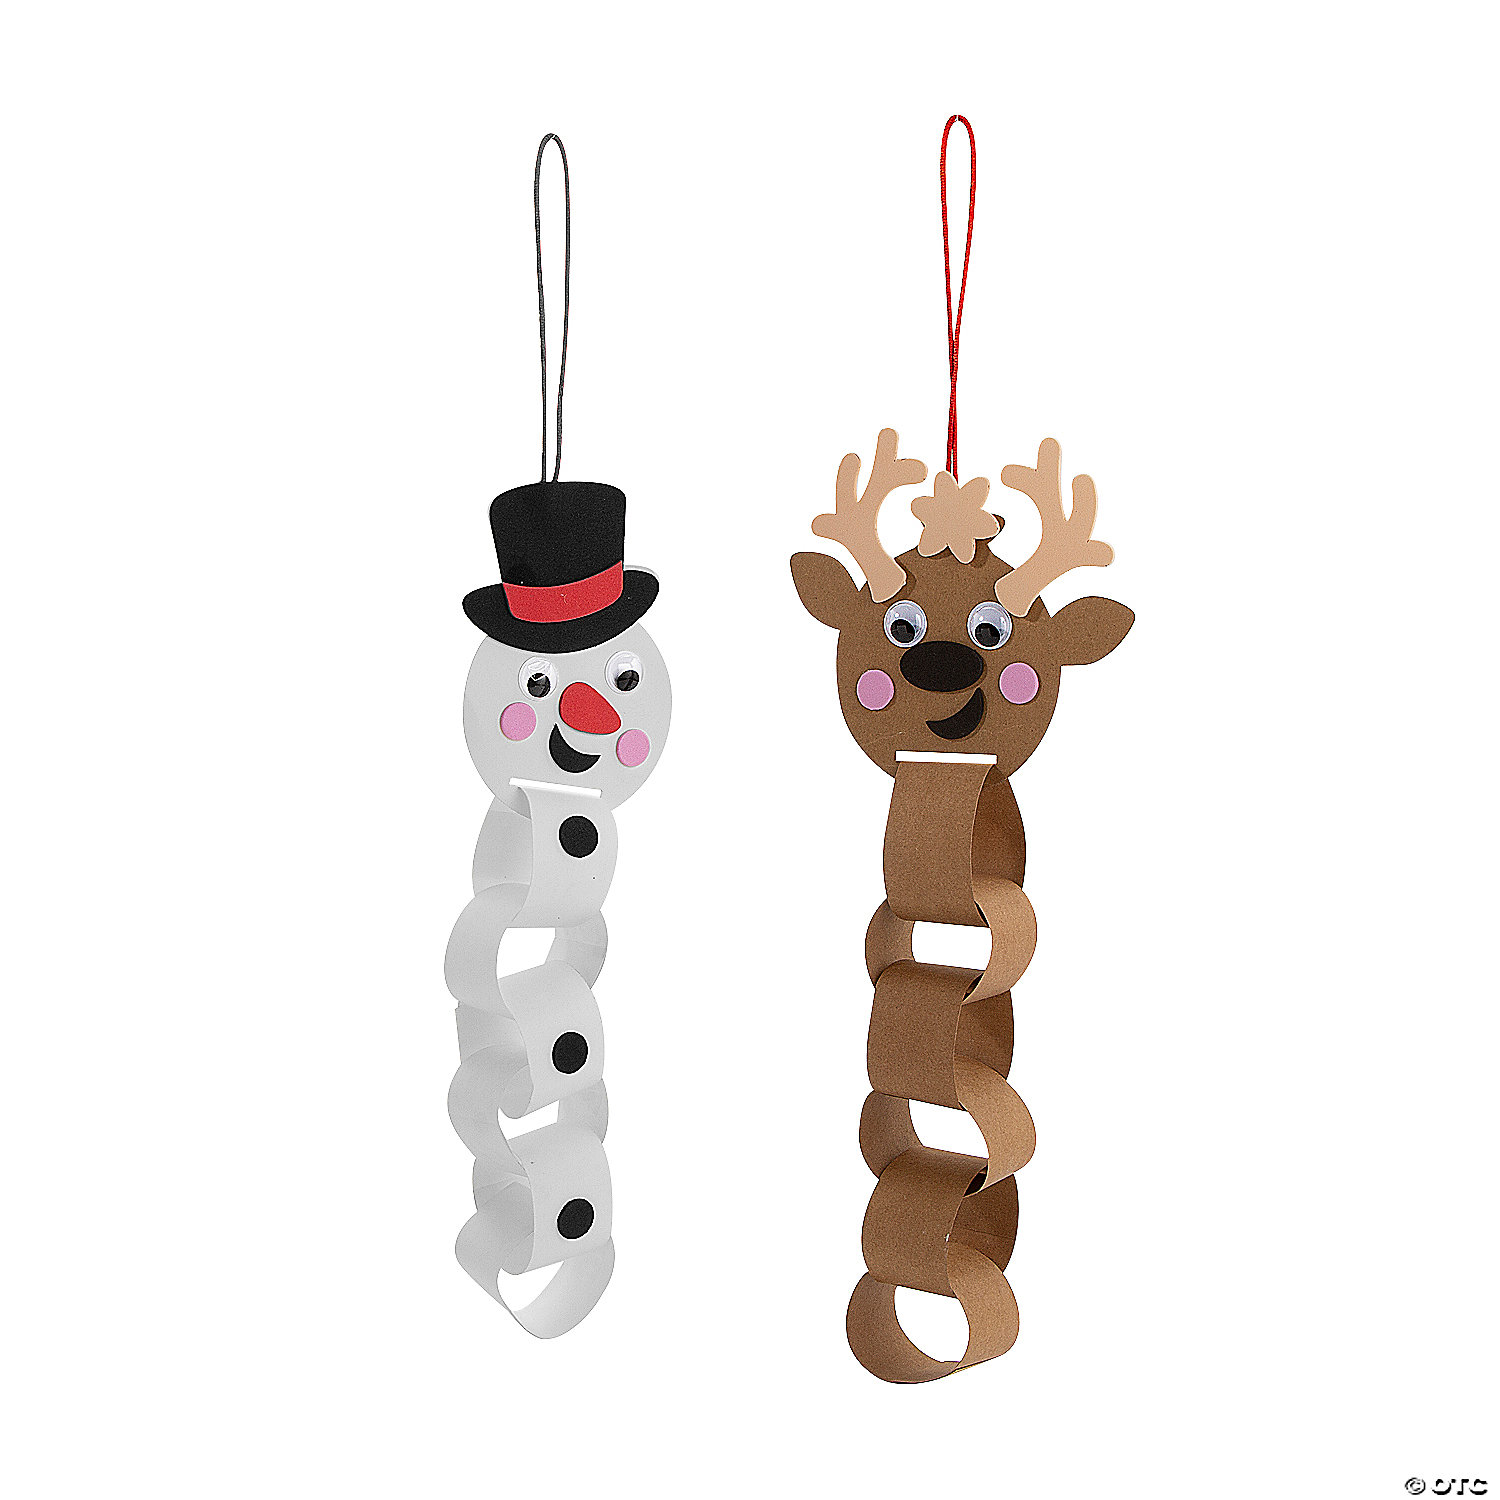 Christmas Character Paper Chain Craft Kit - Makes 12